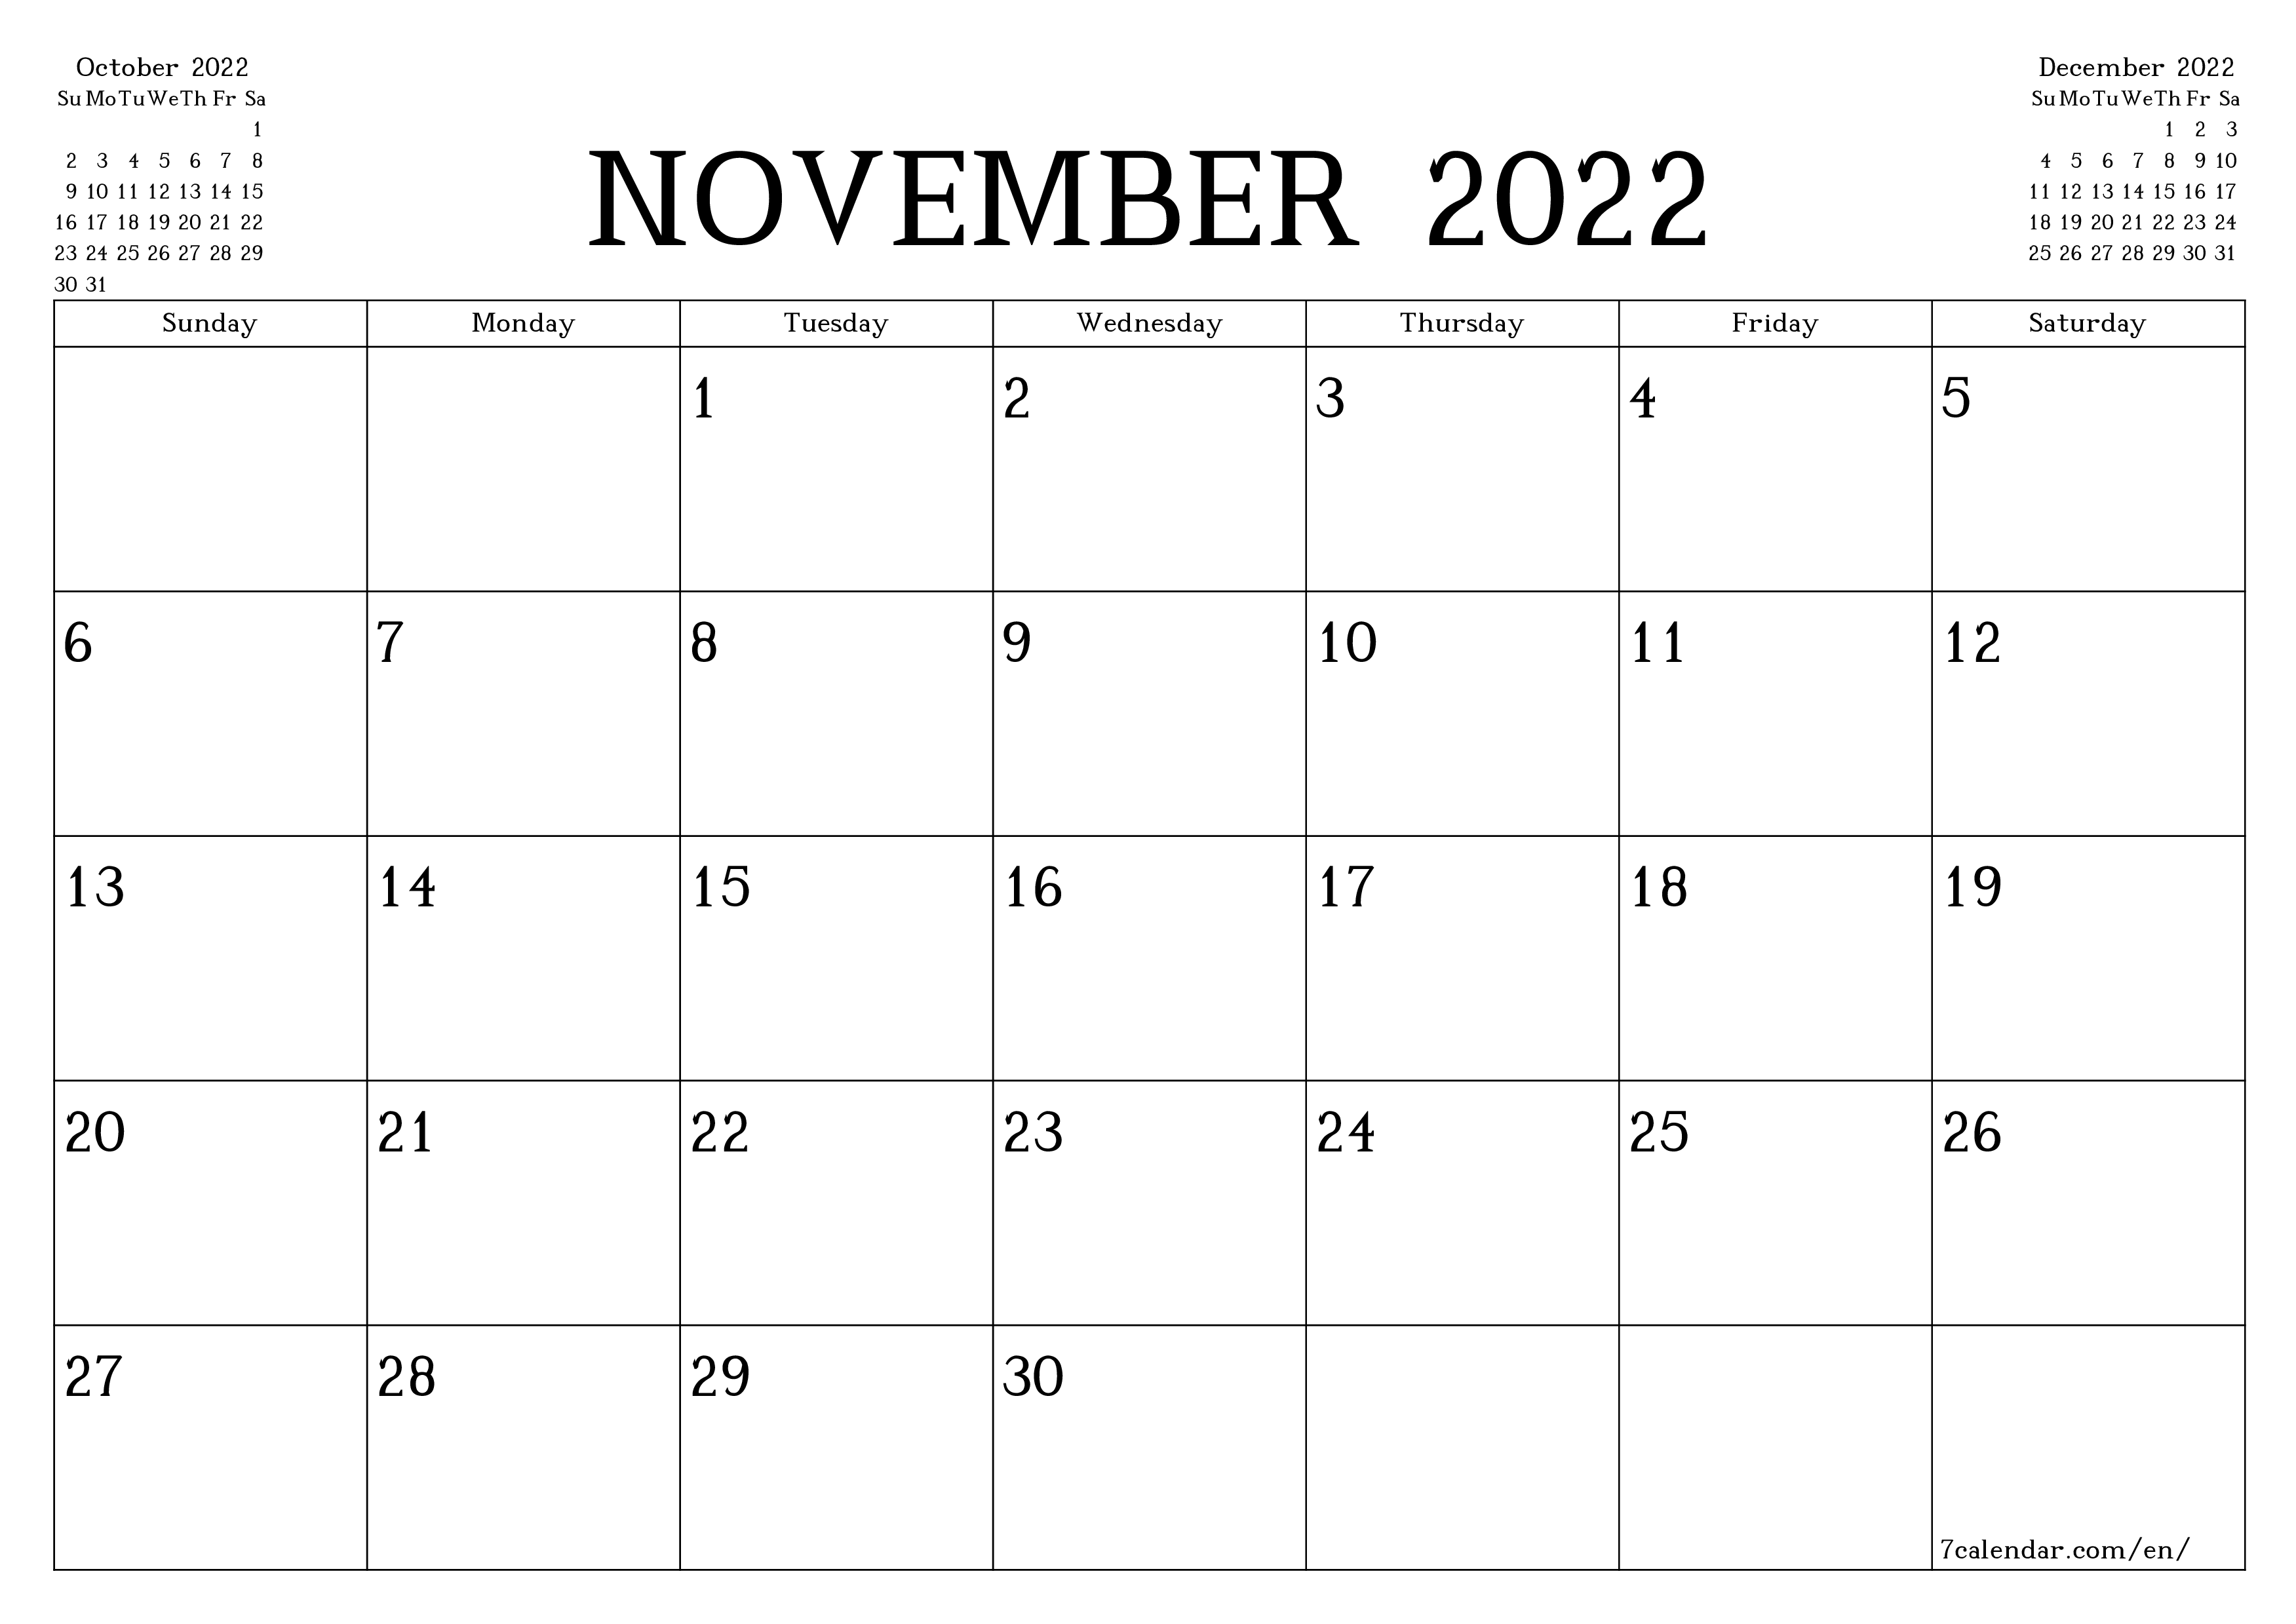 Blank monthly printable calendar and planner for month November 2022 with notes save and print to PDF PNG English - 7calendar.com